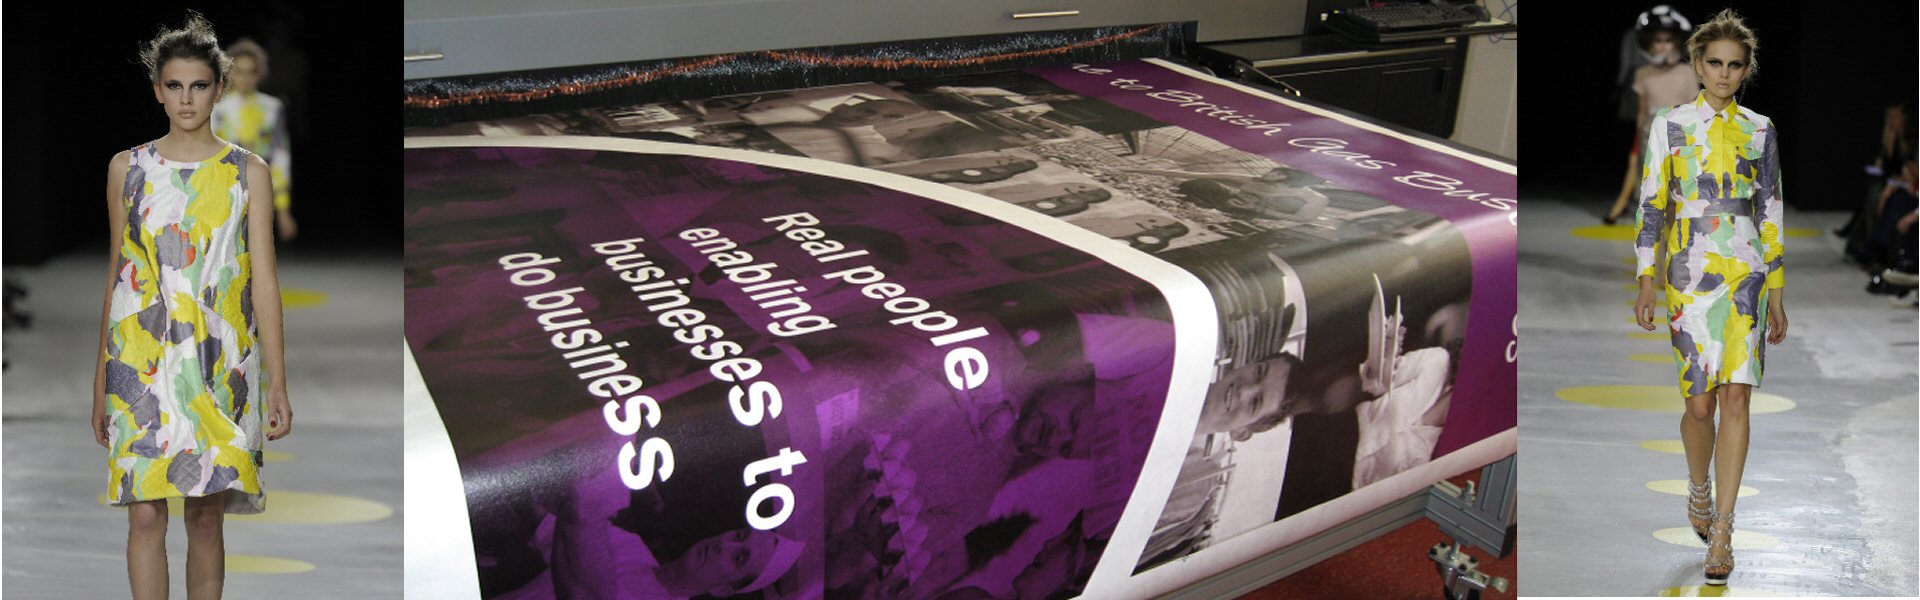 Tyvek Printed Posters and Dresses - Evans Graphics